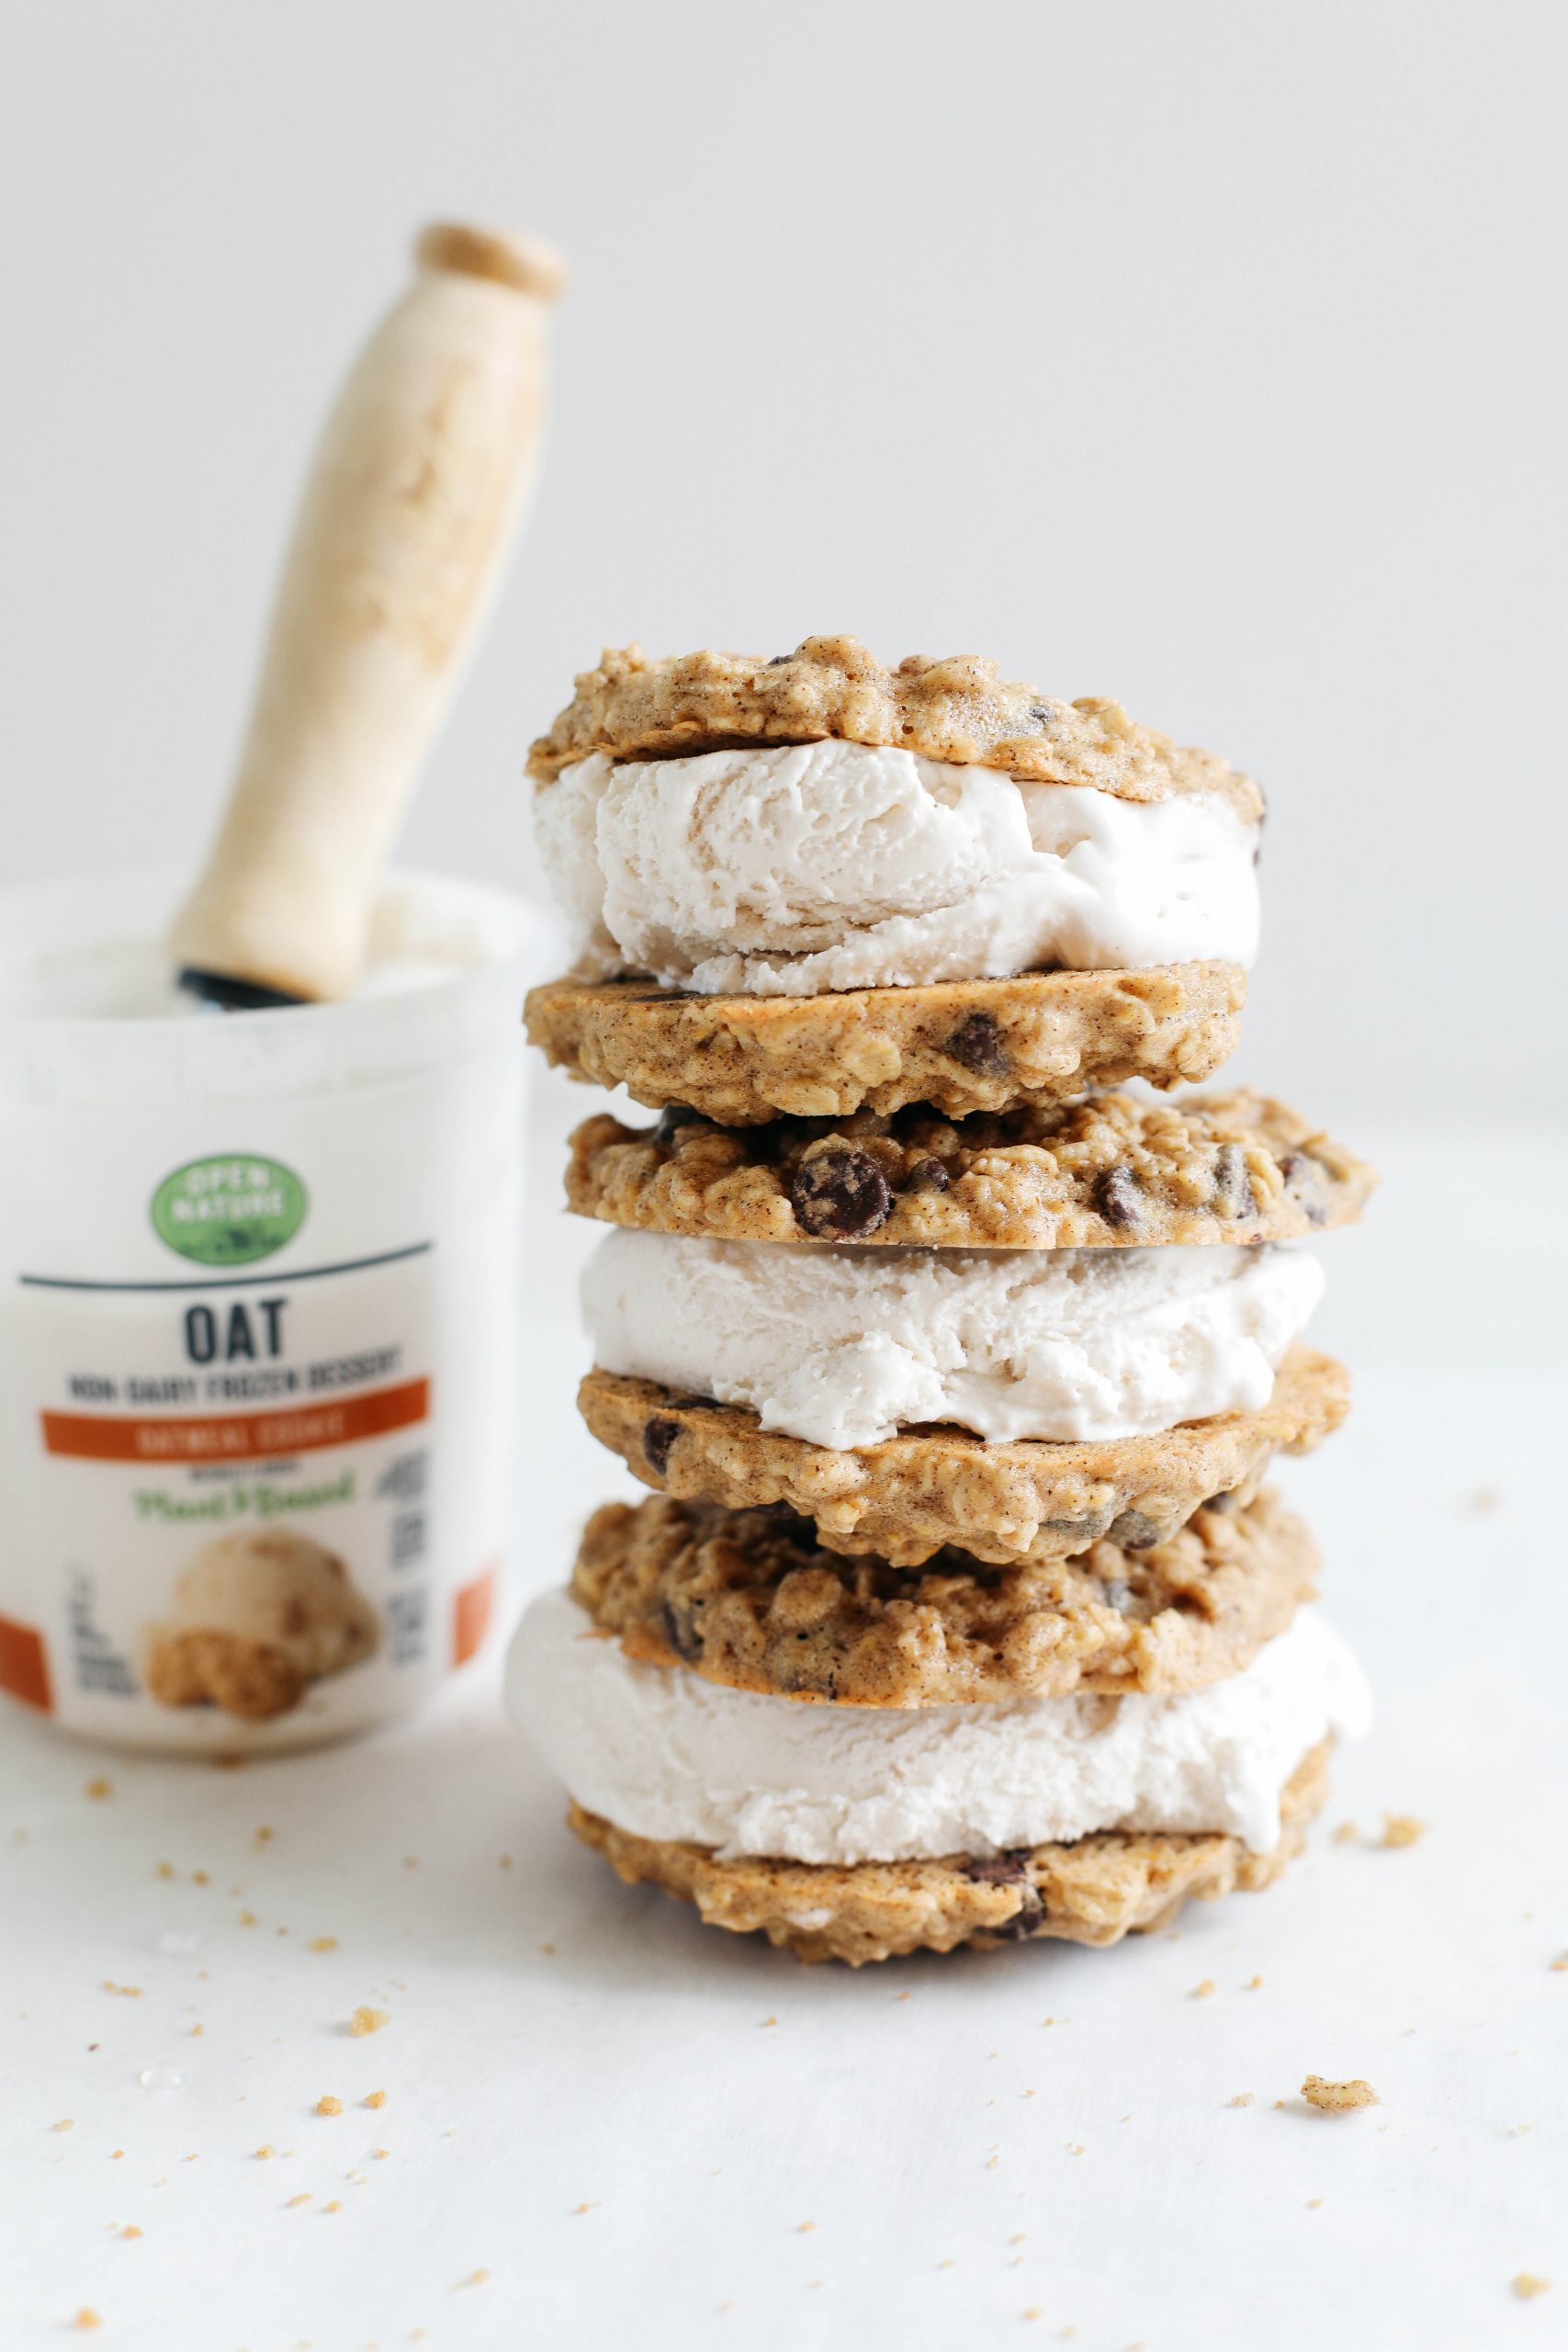 Celebrate the summer with these homemade oatmeal chocolate chip cookie ice cream sandwiches that are dairy-free, vegan and taste just like your childhood!